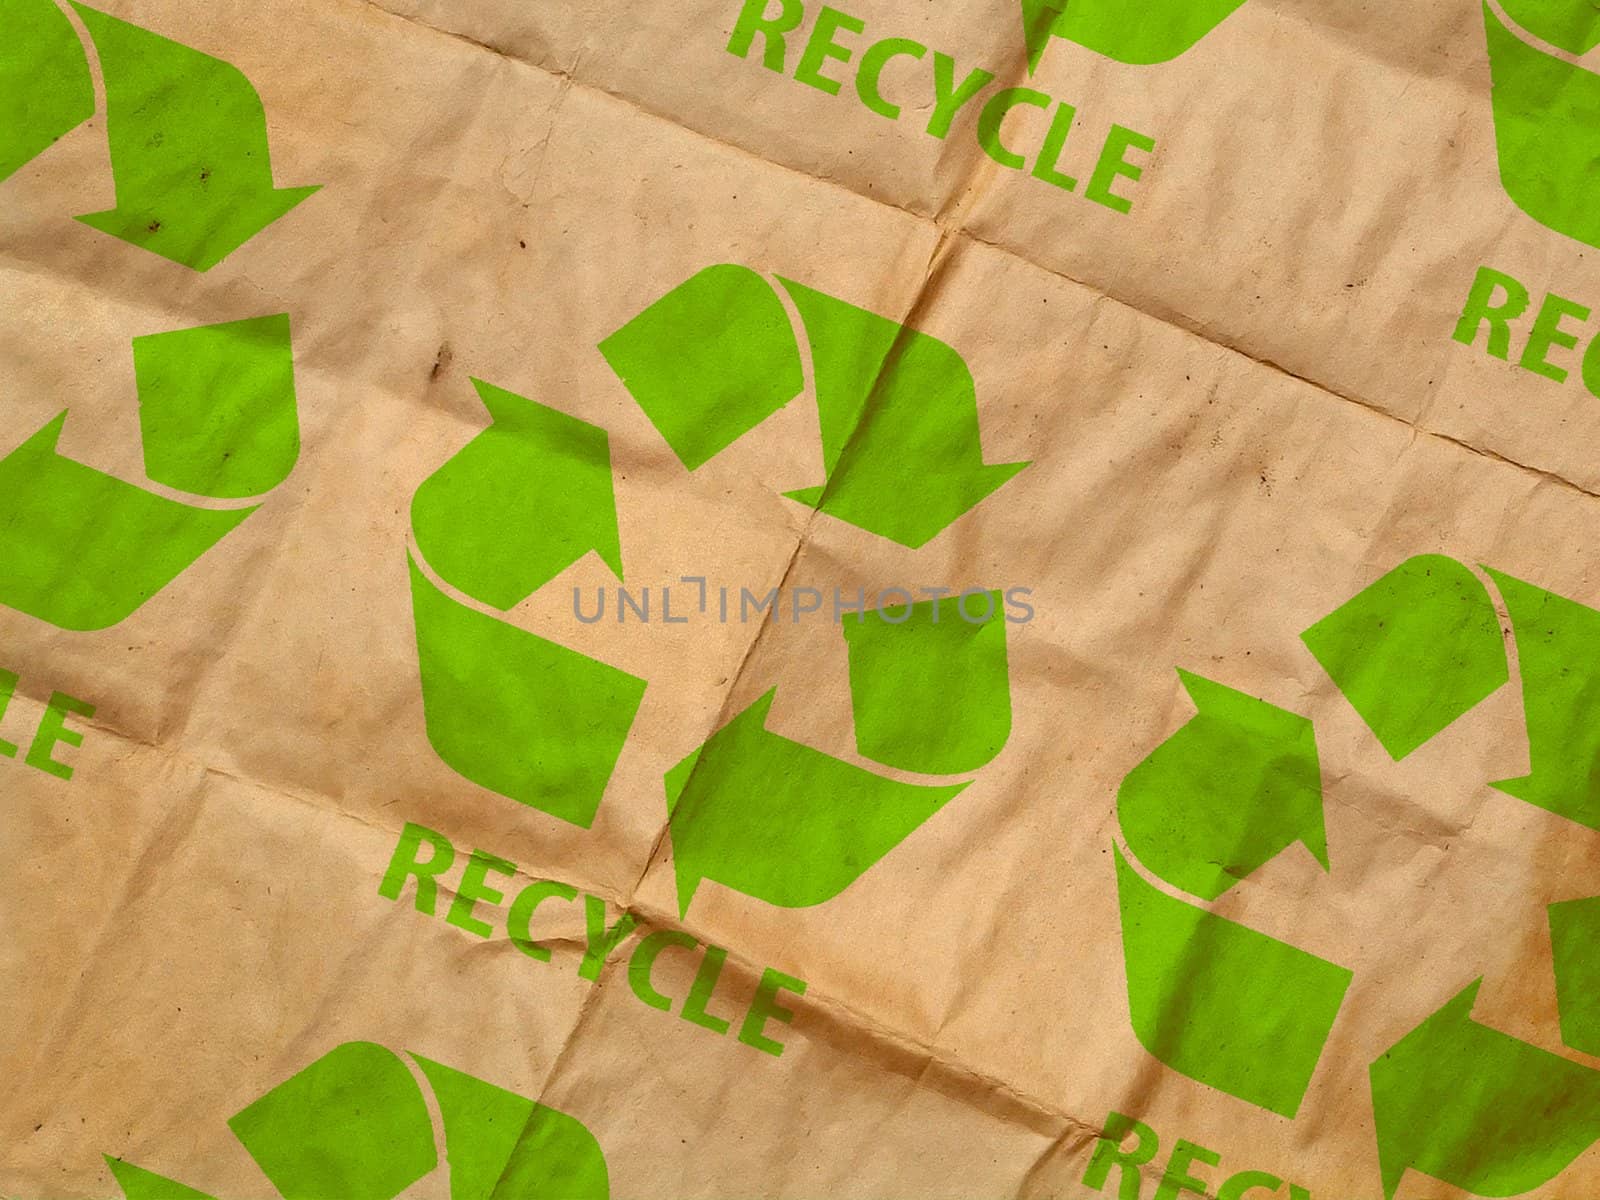 Image evidently showing on necessity of recycling and processing of paper waste.